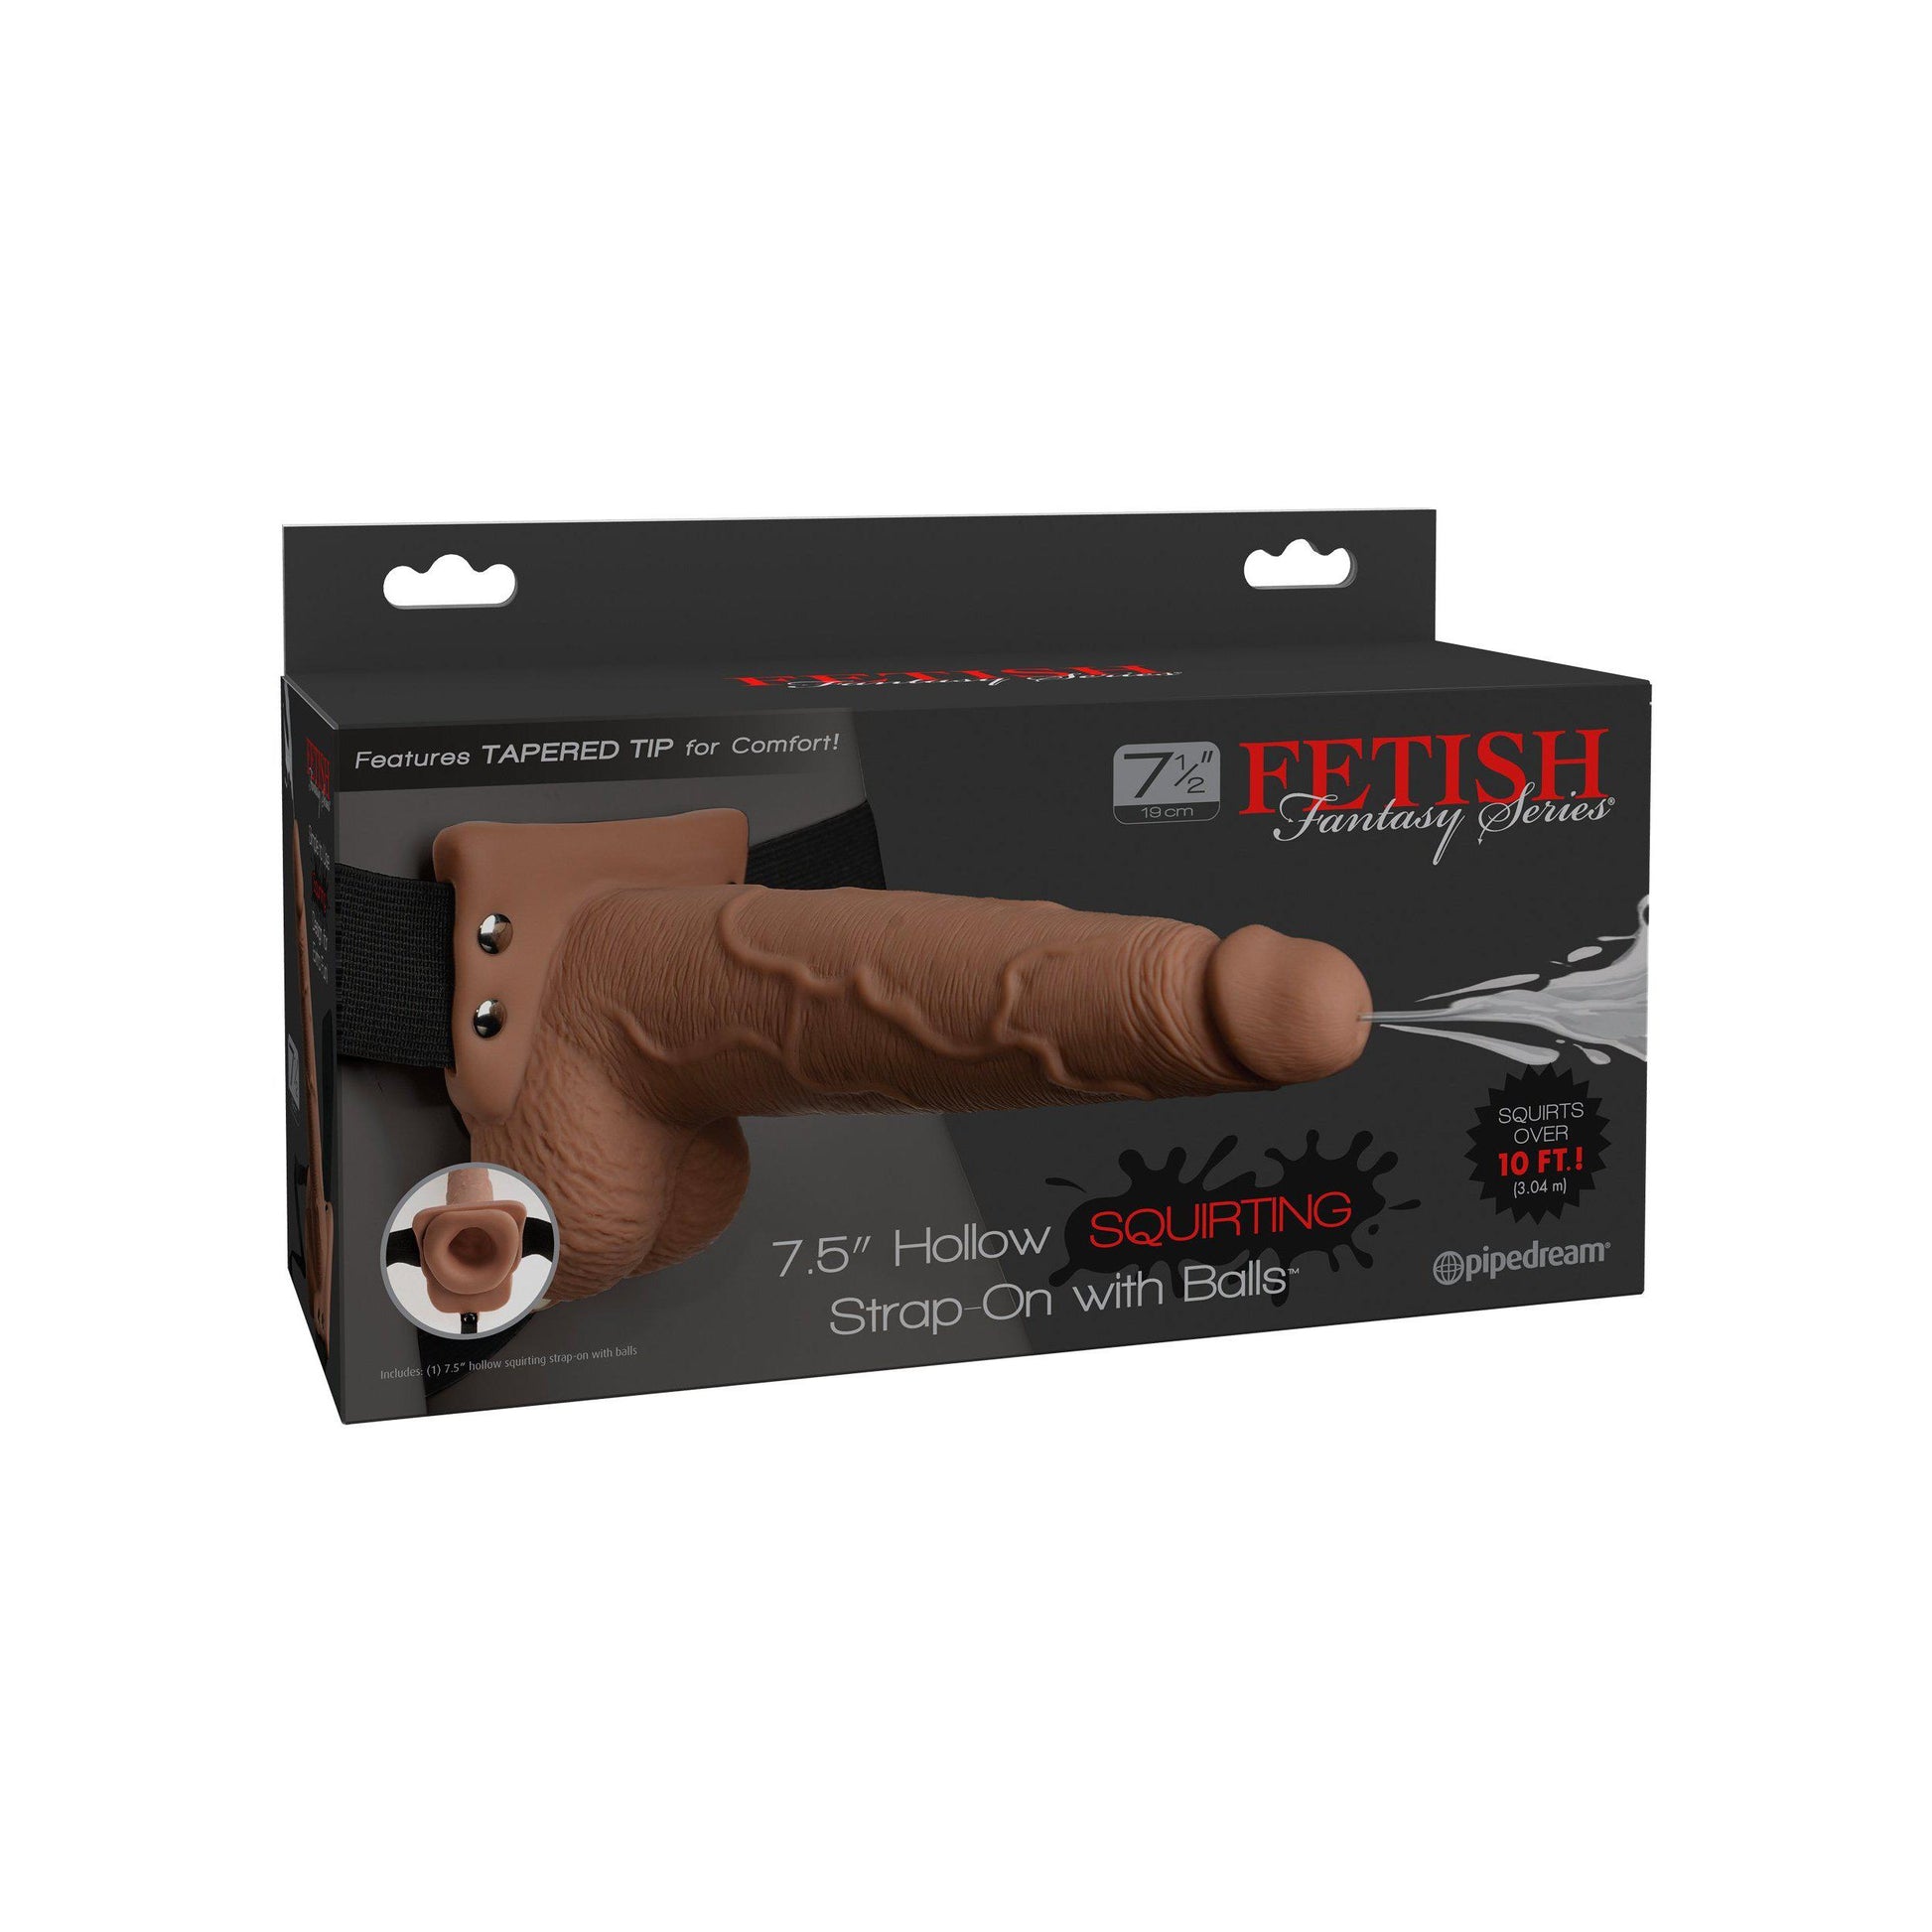 Fetish Fantasy Series 7.5 Inch Hollow Squirting Strap-on With Balls -